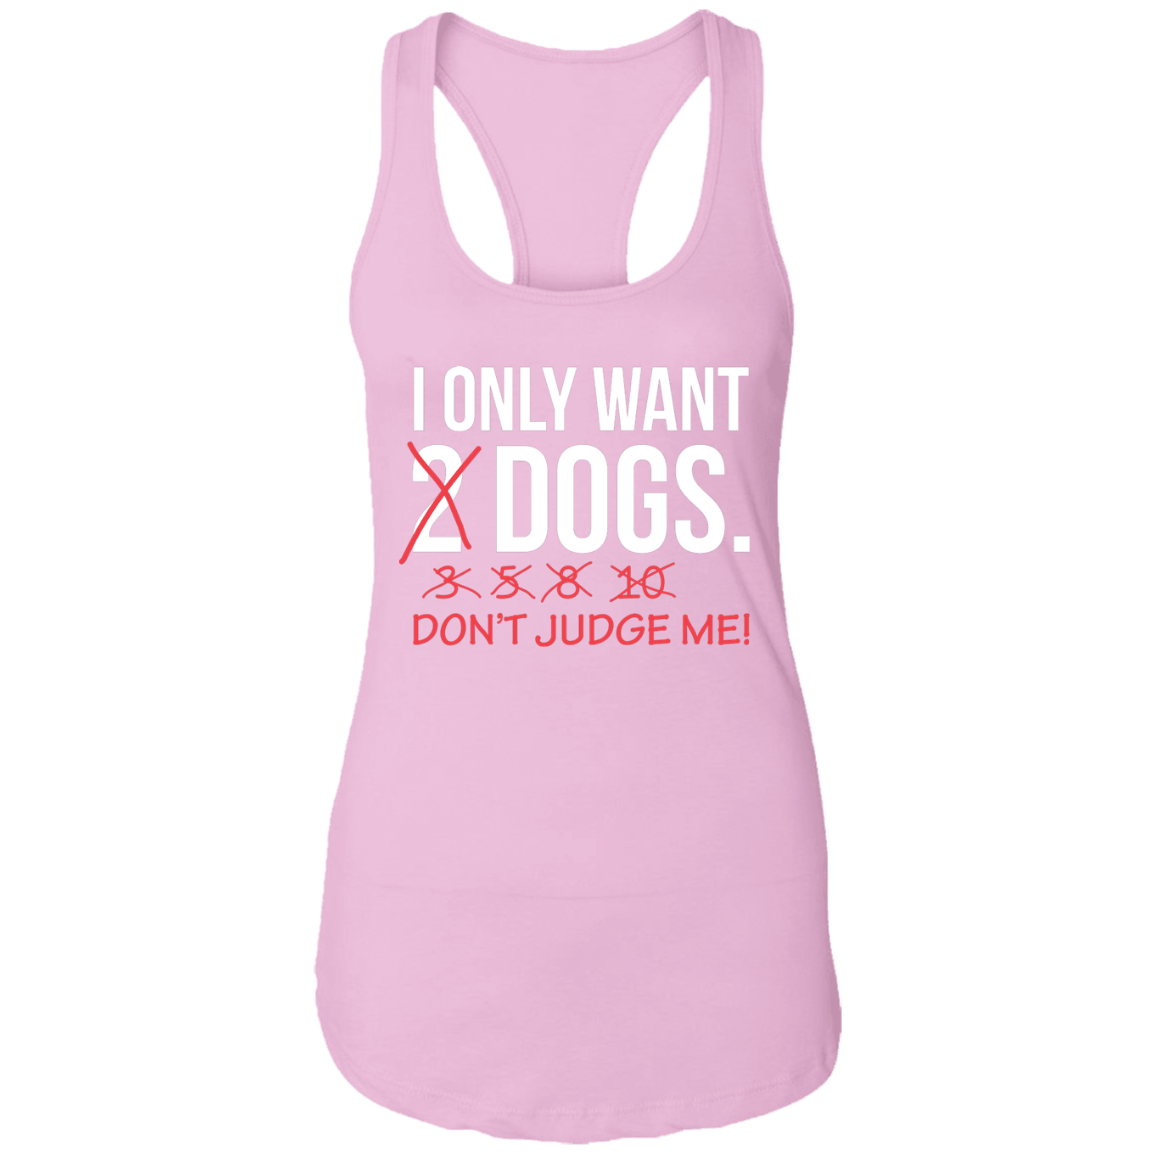 I Only Want 2 Dogs - Ladies Racer Back Tank.